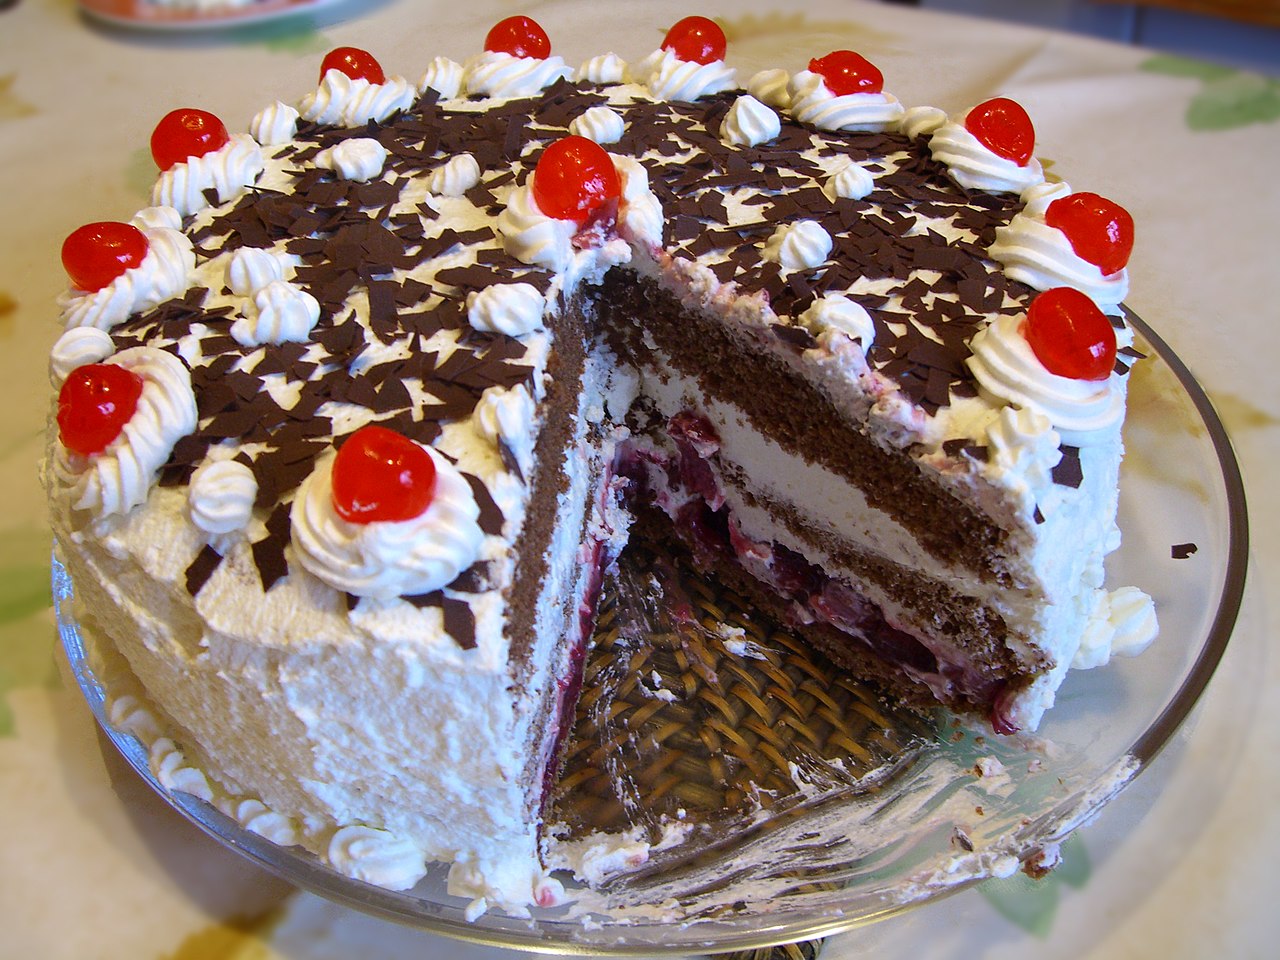 A chocolate cake with cherries and cream. One slice has been removed to reveal the layers of cake and cream inside